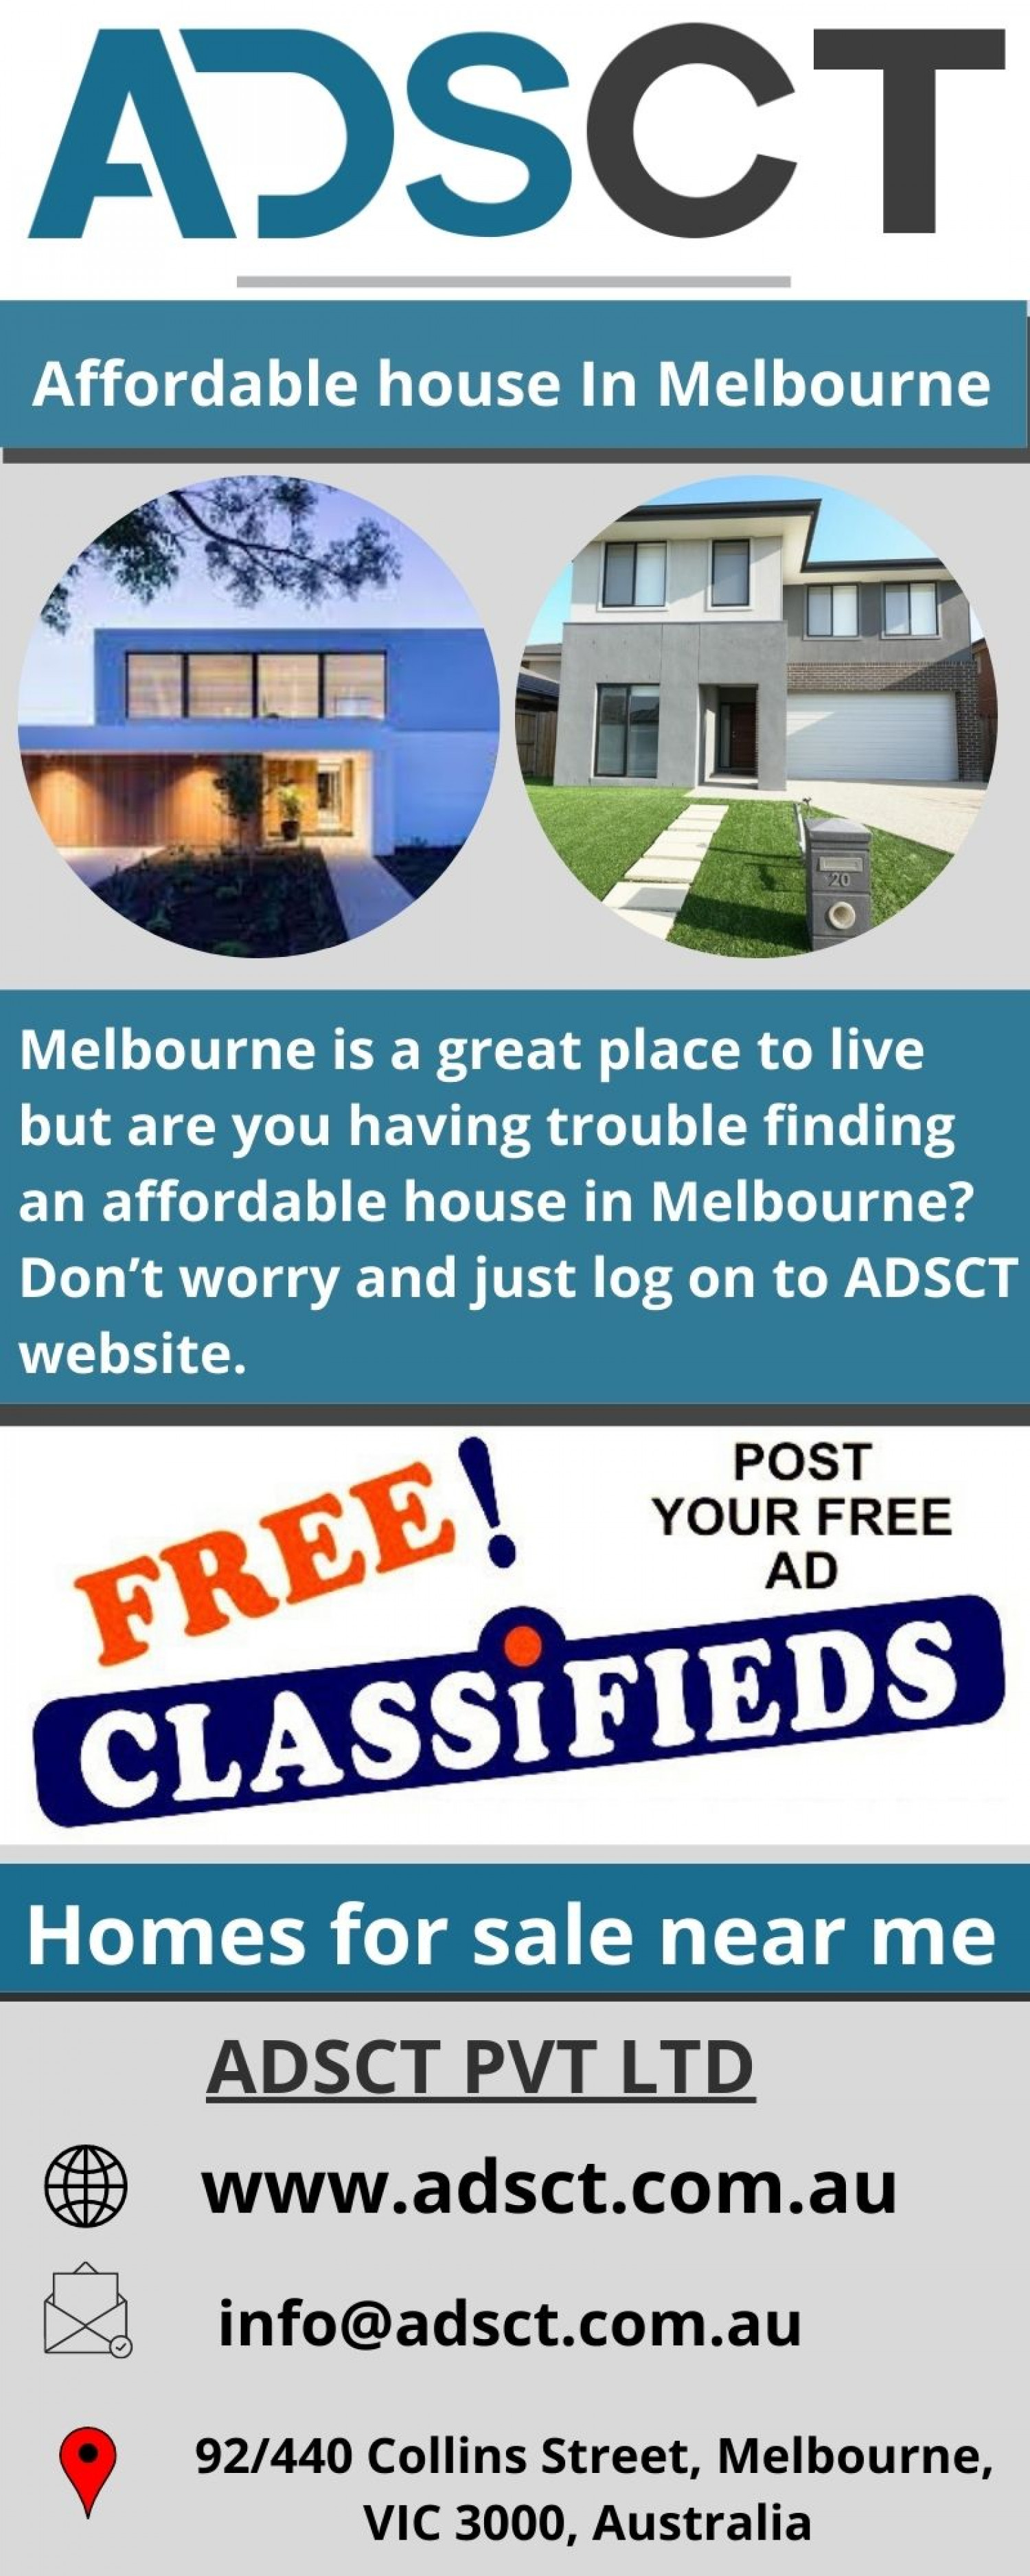 Affordable house in Melbourne Infographic